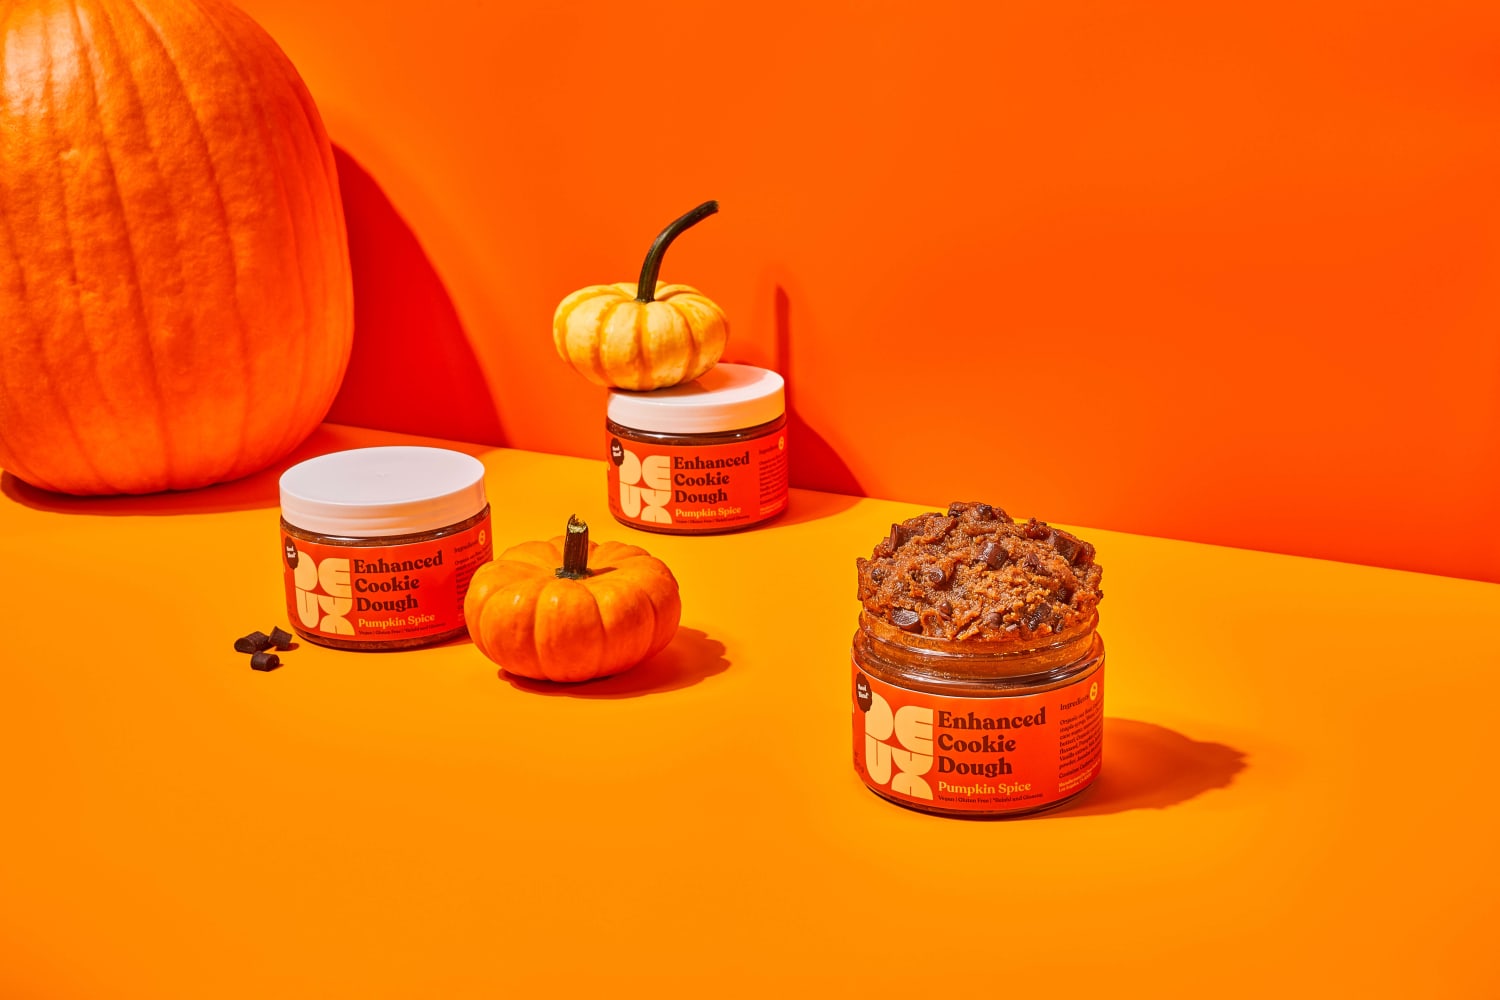 This Editor-Favorite Edible Cookie Dough Brand Has a Pumpkin Spice Flavor I Can’t Stop Snacking on